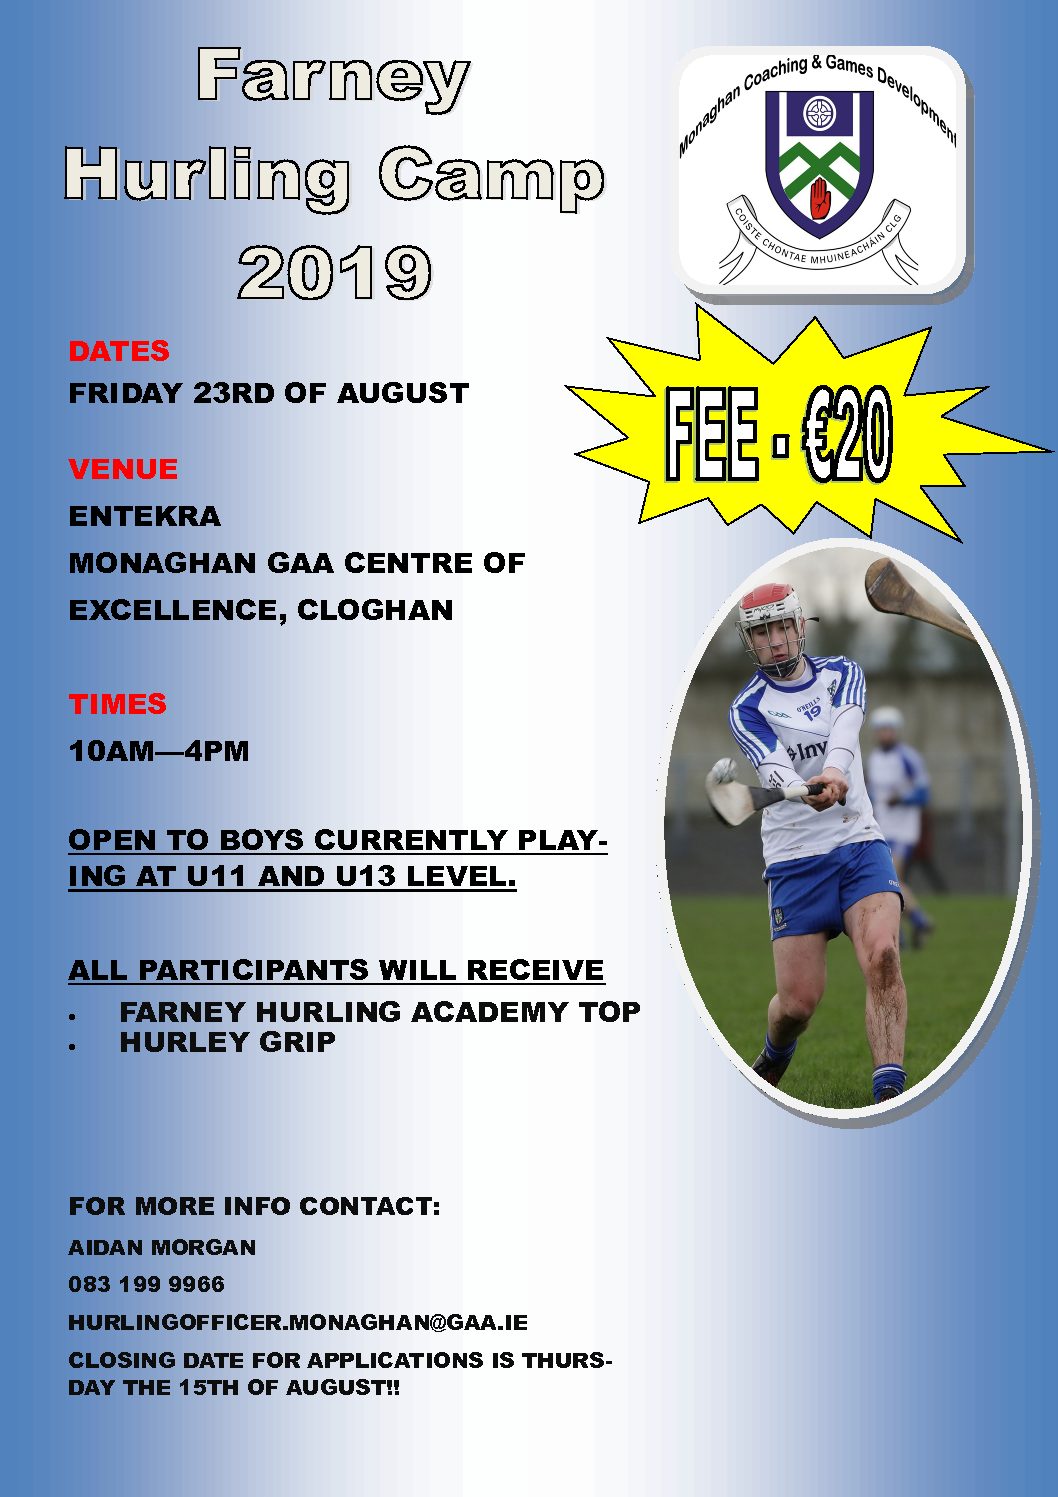 Monaghan Farney Hurling Camp 2019 – 1 Day event on Friday 23rd August…..